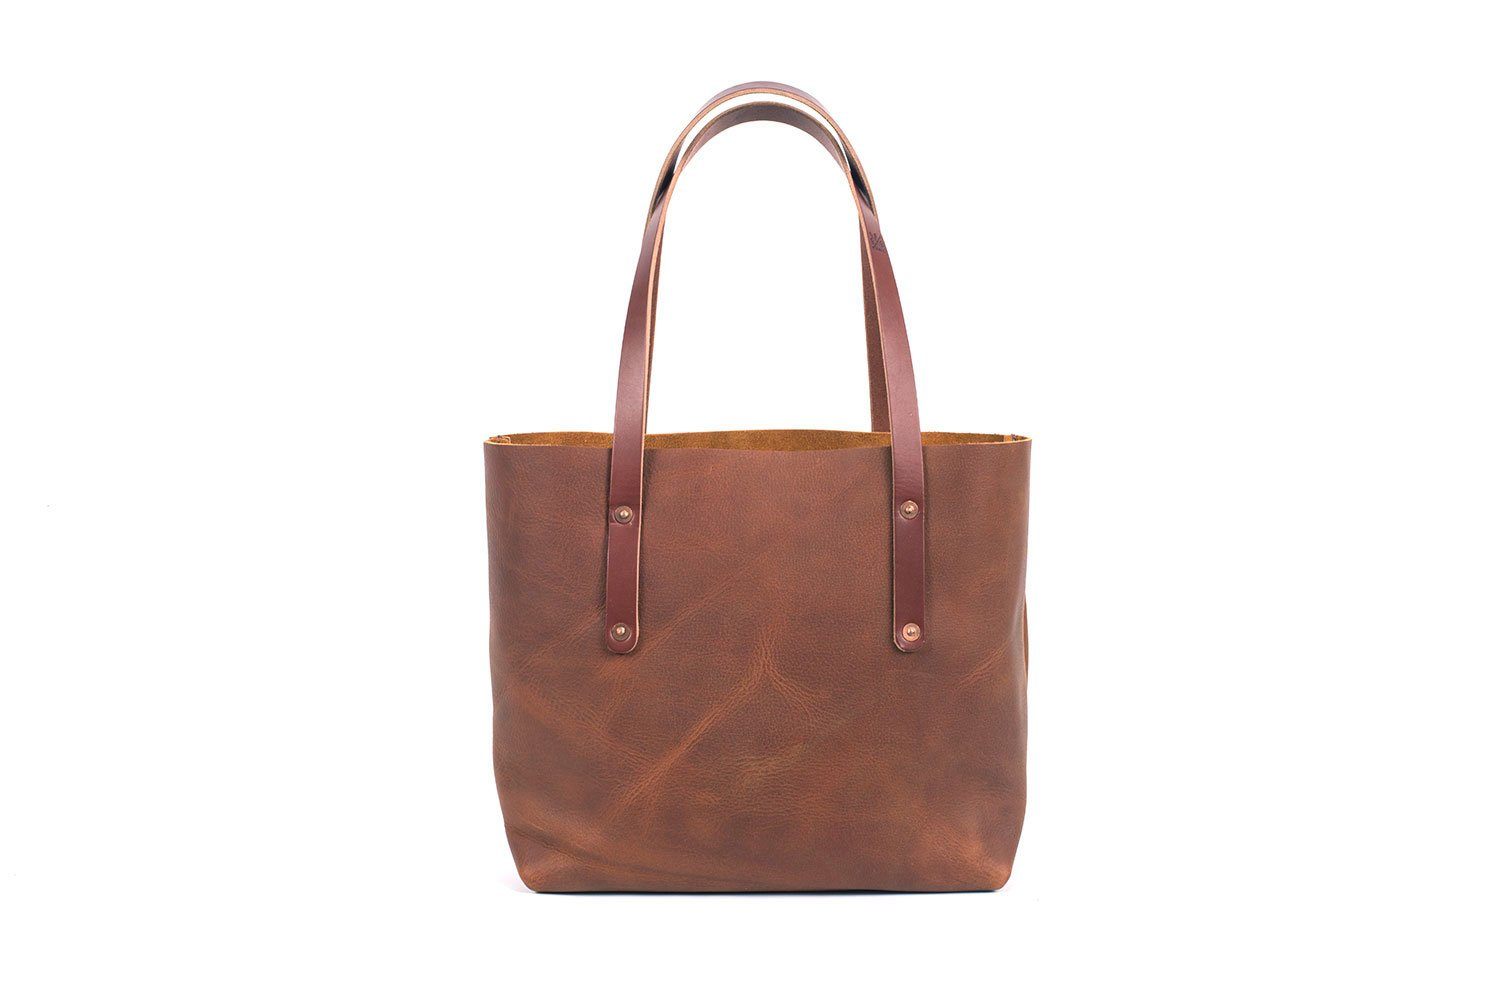 AVERY LEATHER TOTE BAG - MEDIUM (READY TO SHIP)